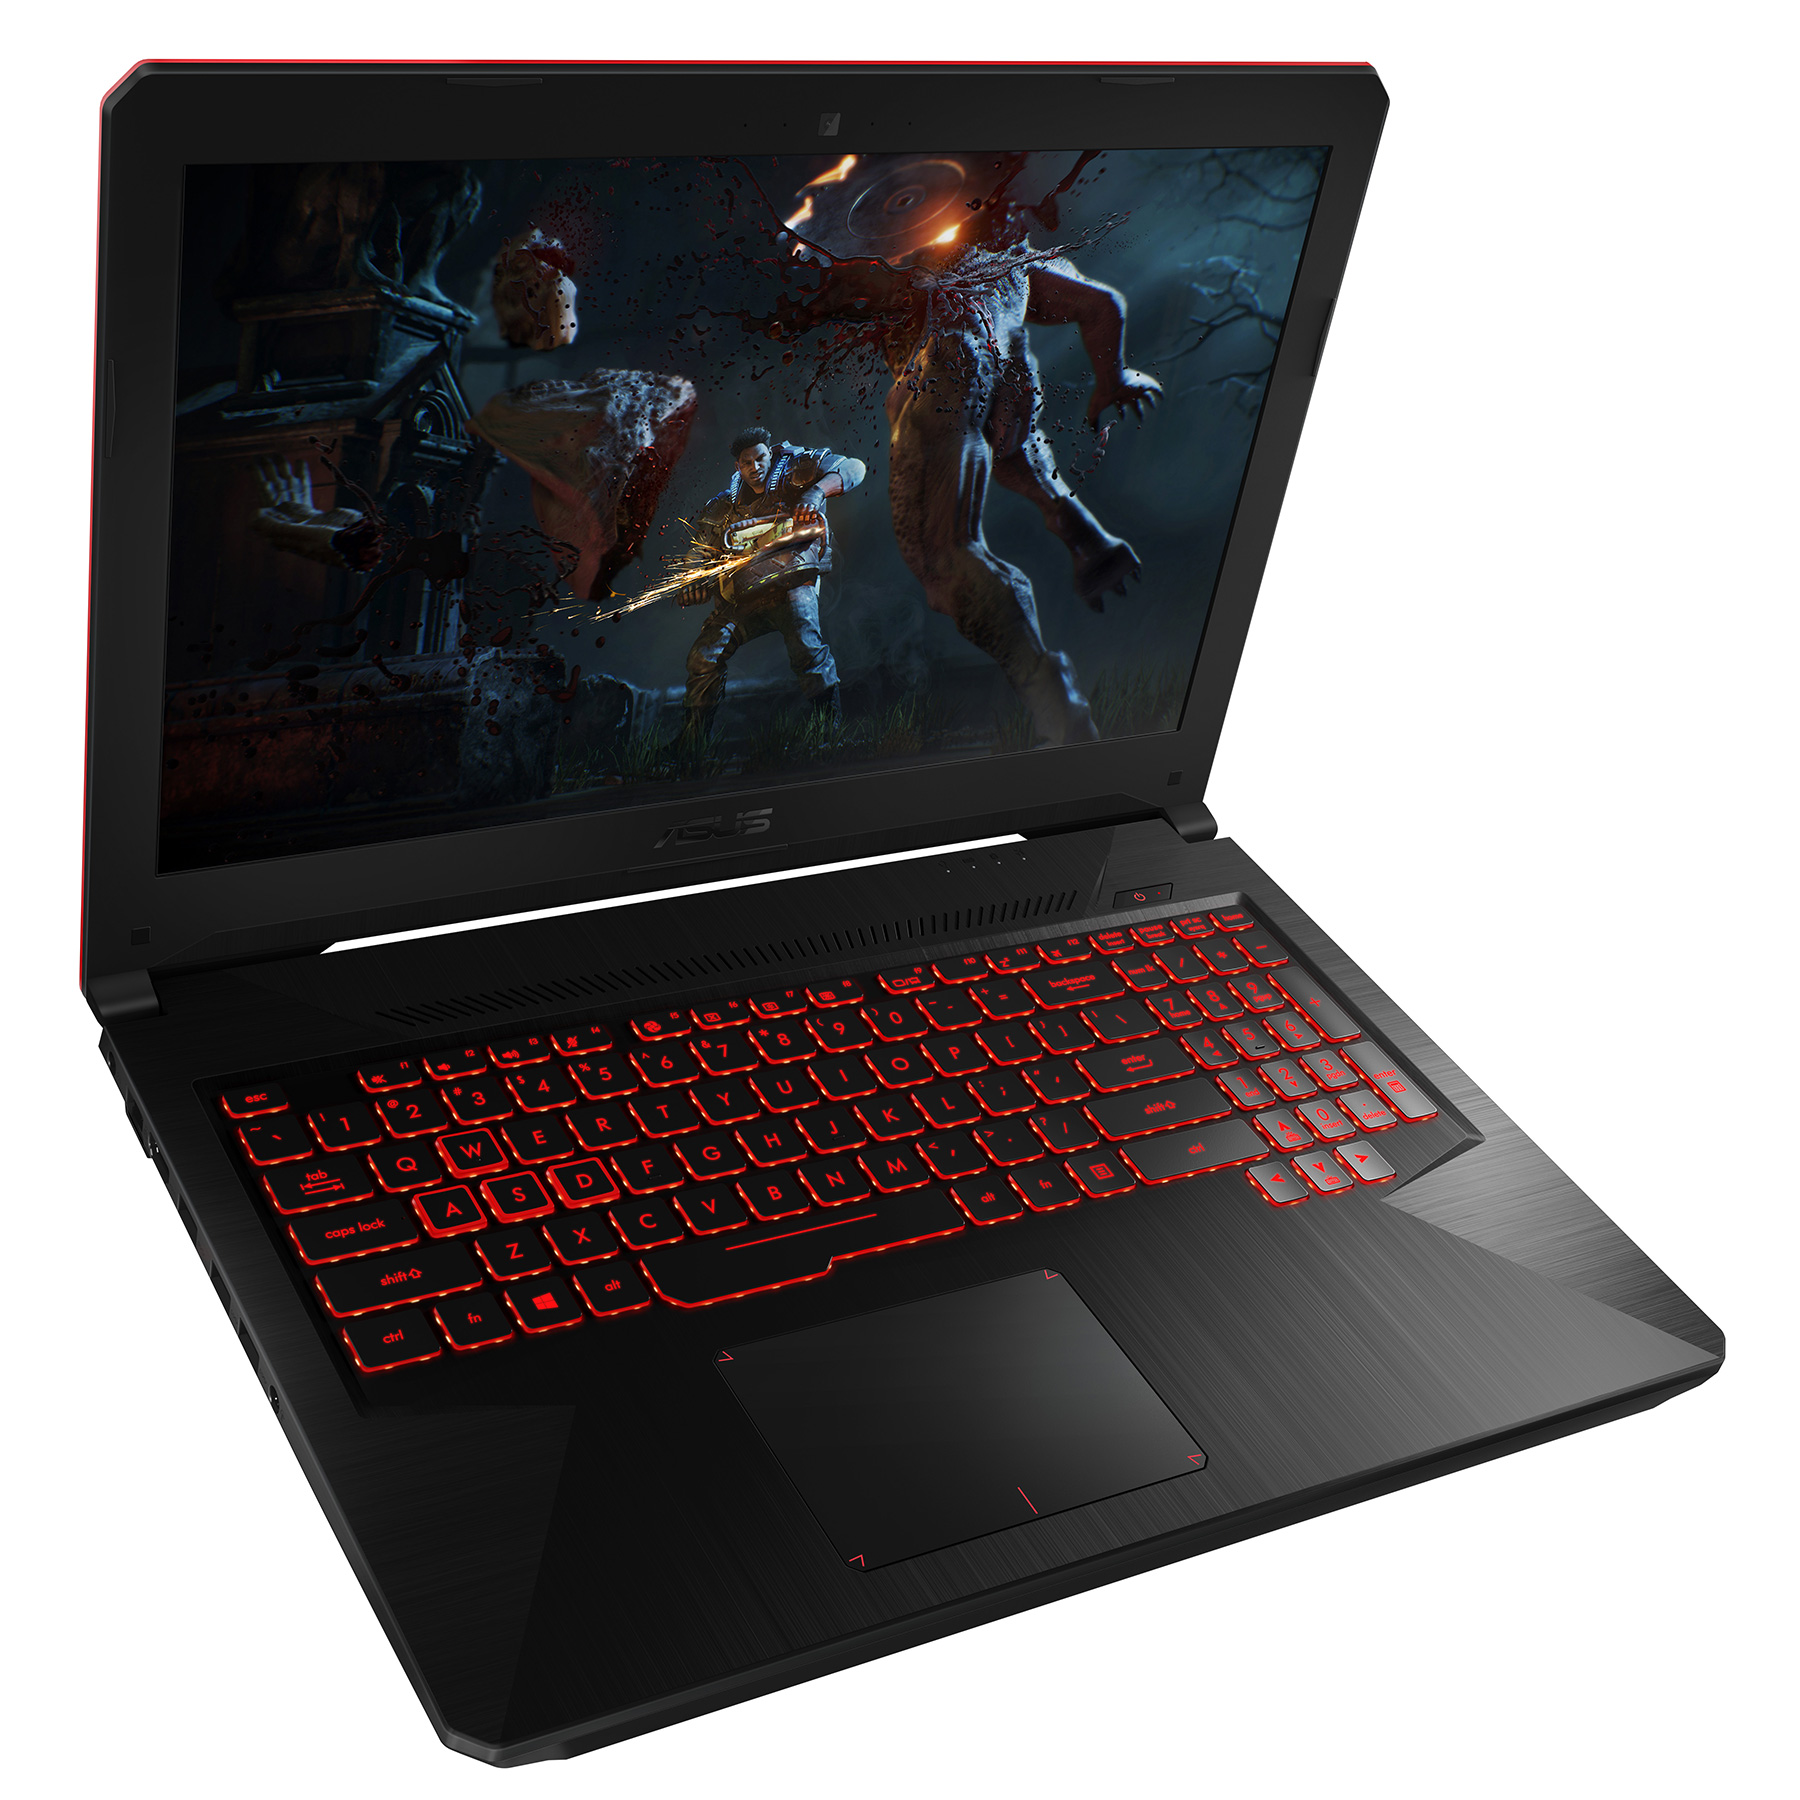 analysere Egern Grusom ASUS TUF Gaming FX504 - Specs, Tests, and Prices | LaptopMedia.com